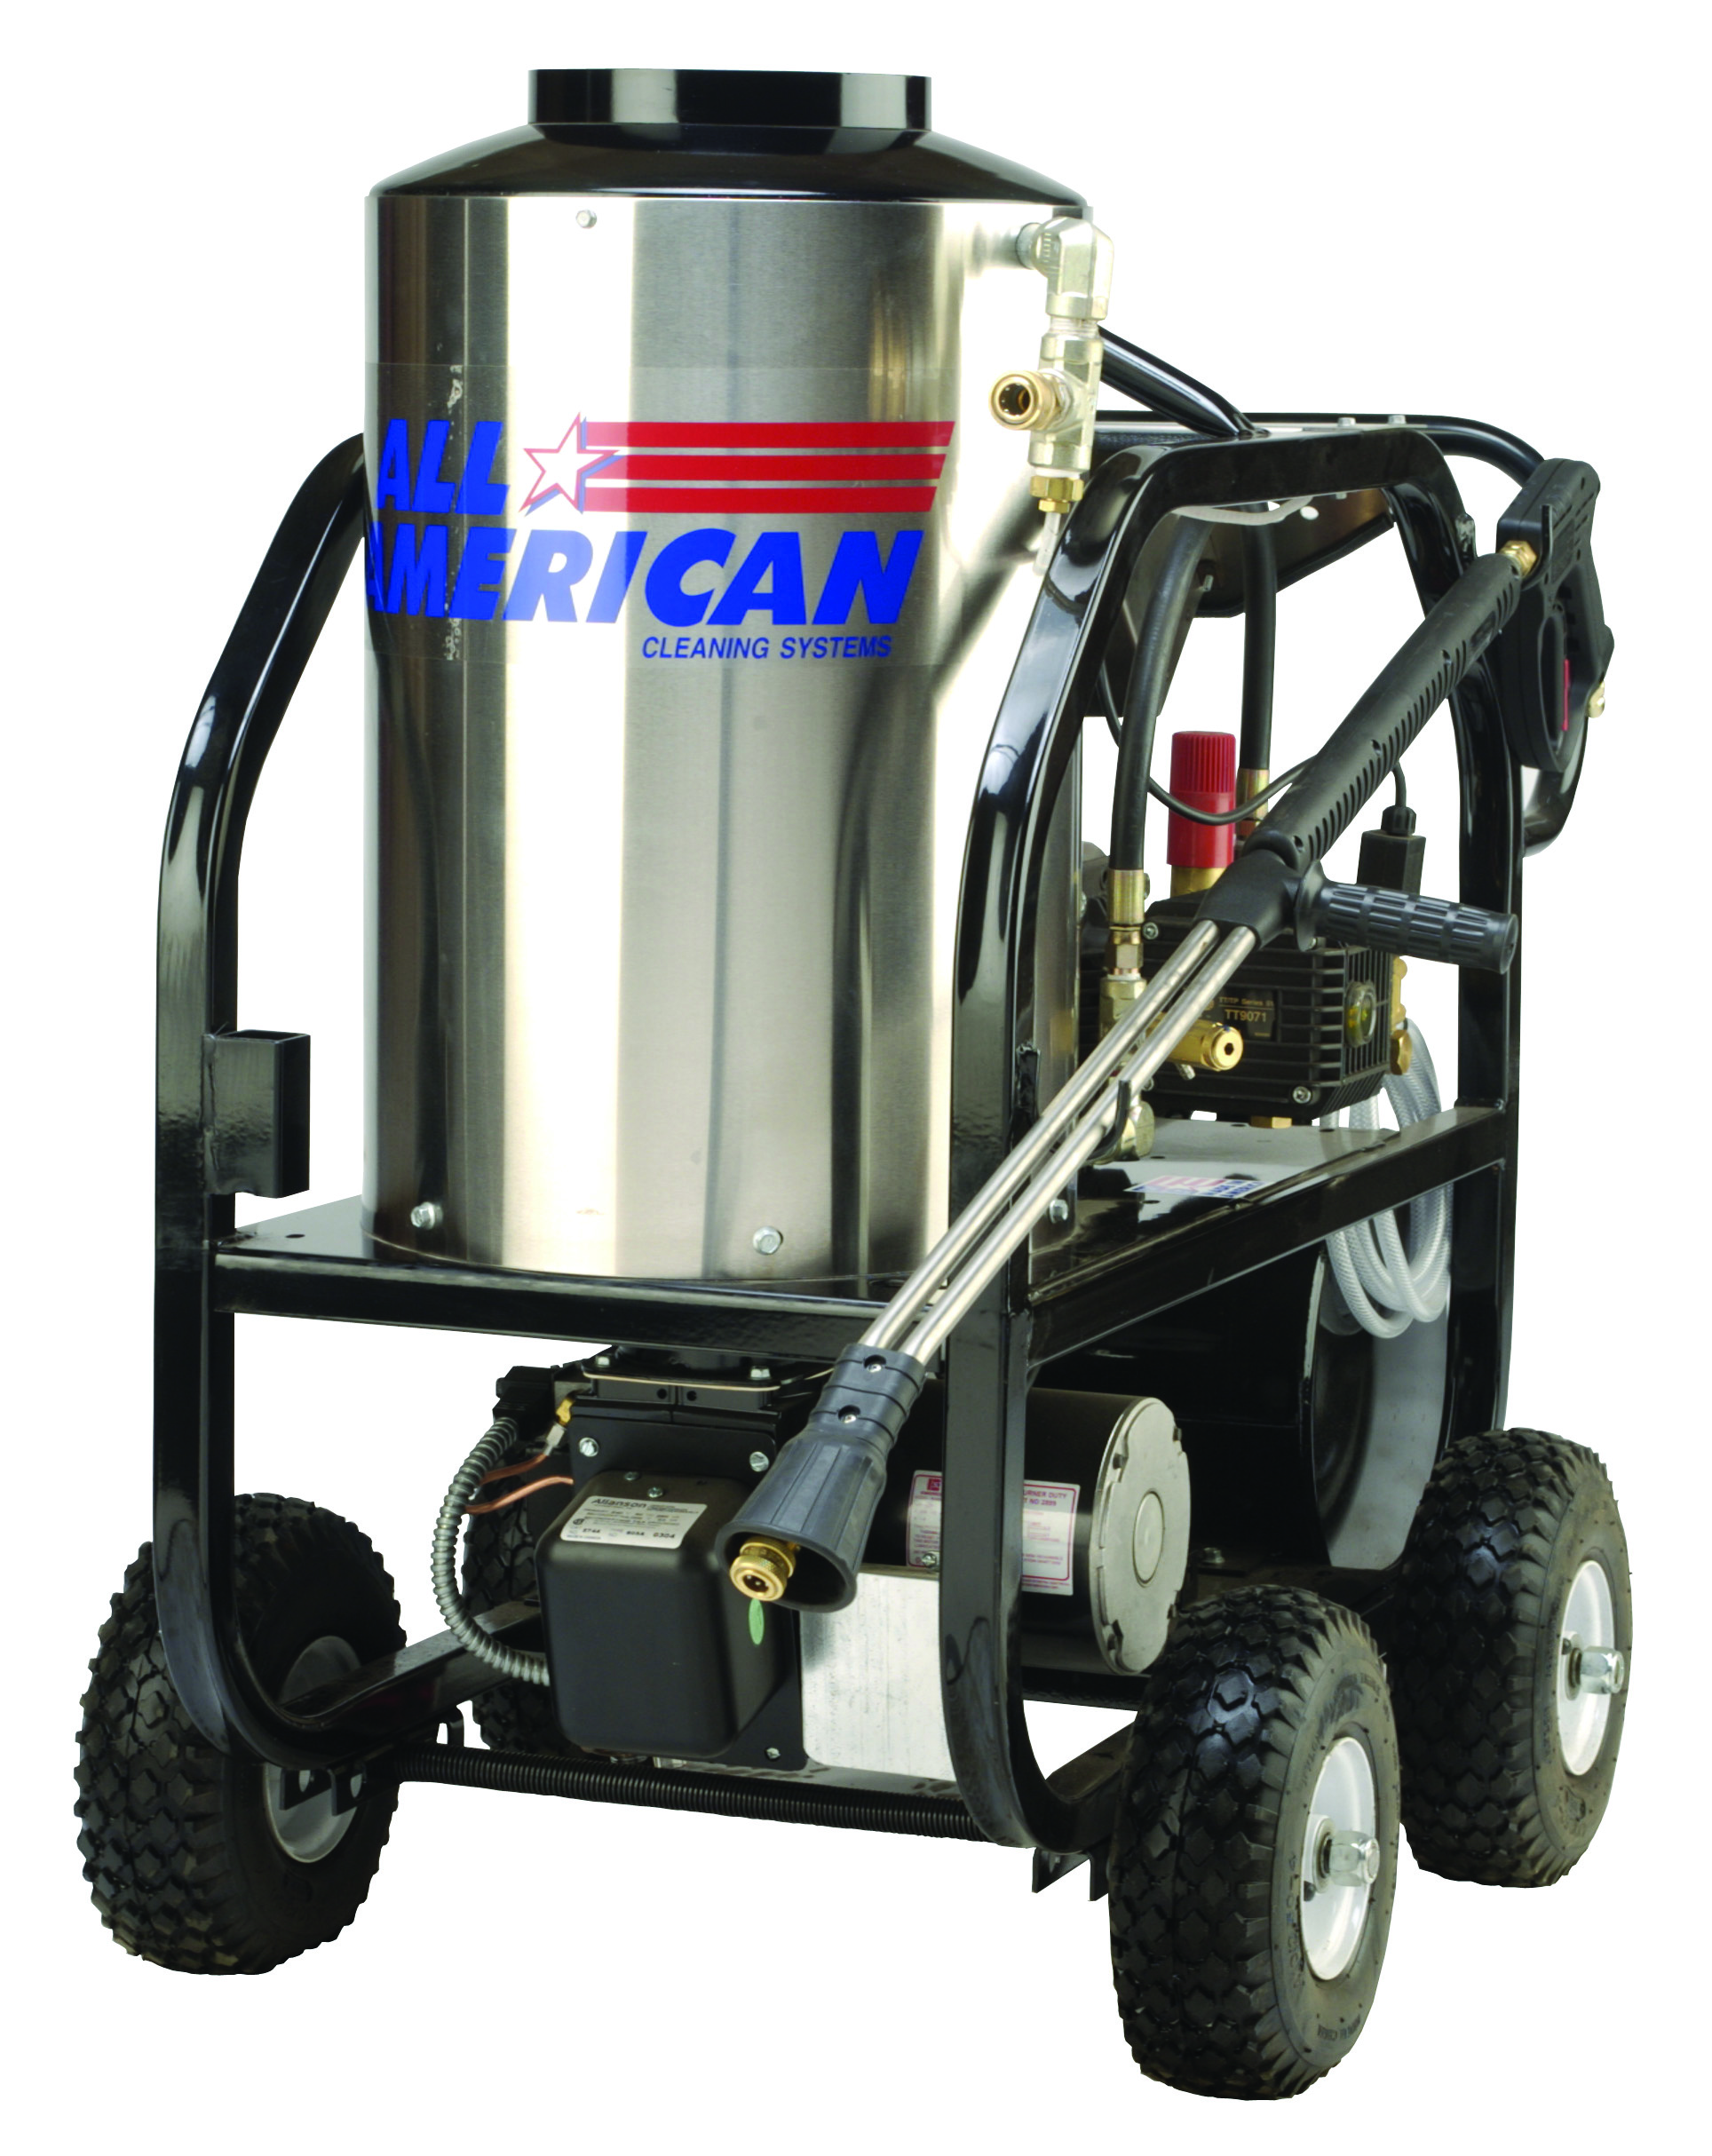 Alkota Cleaning Systems - PRESSURE WASHER HOT WATER -  I215AD-000000